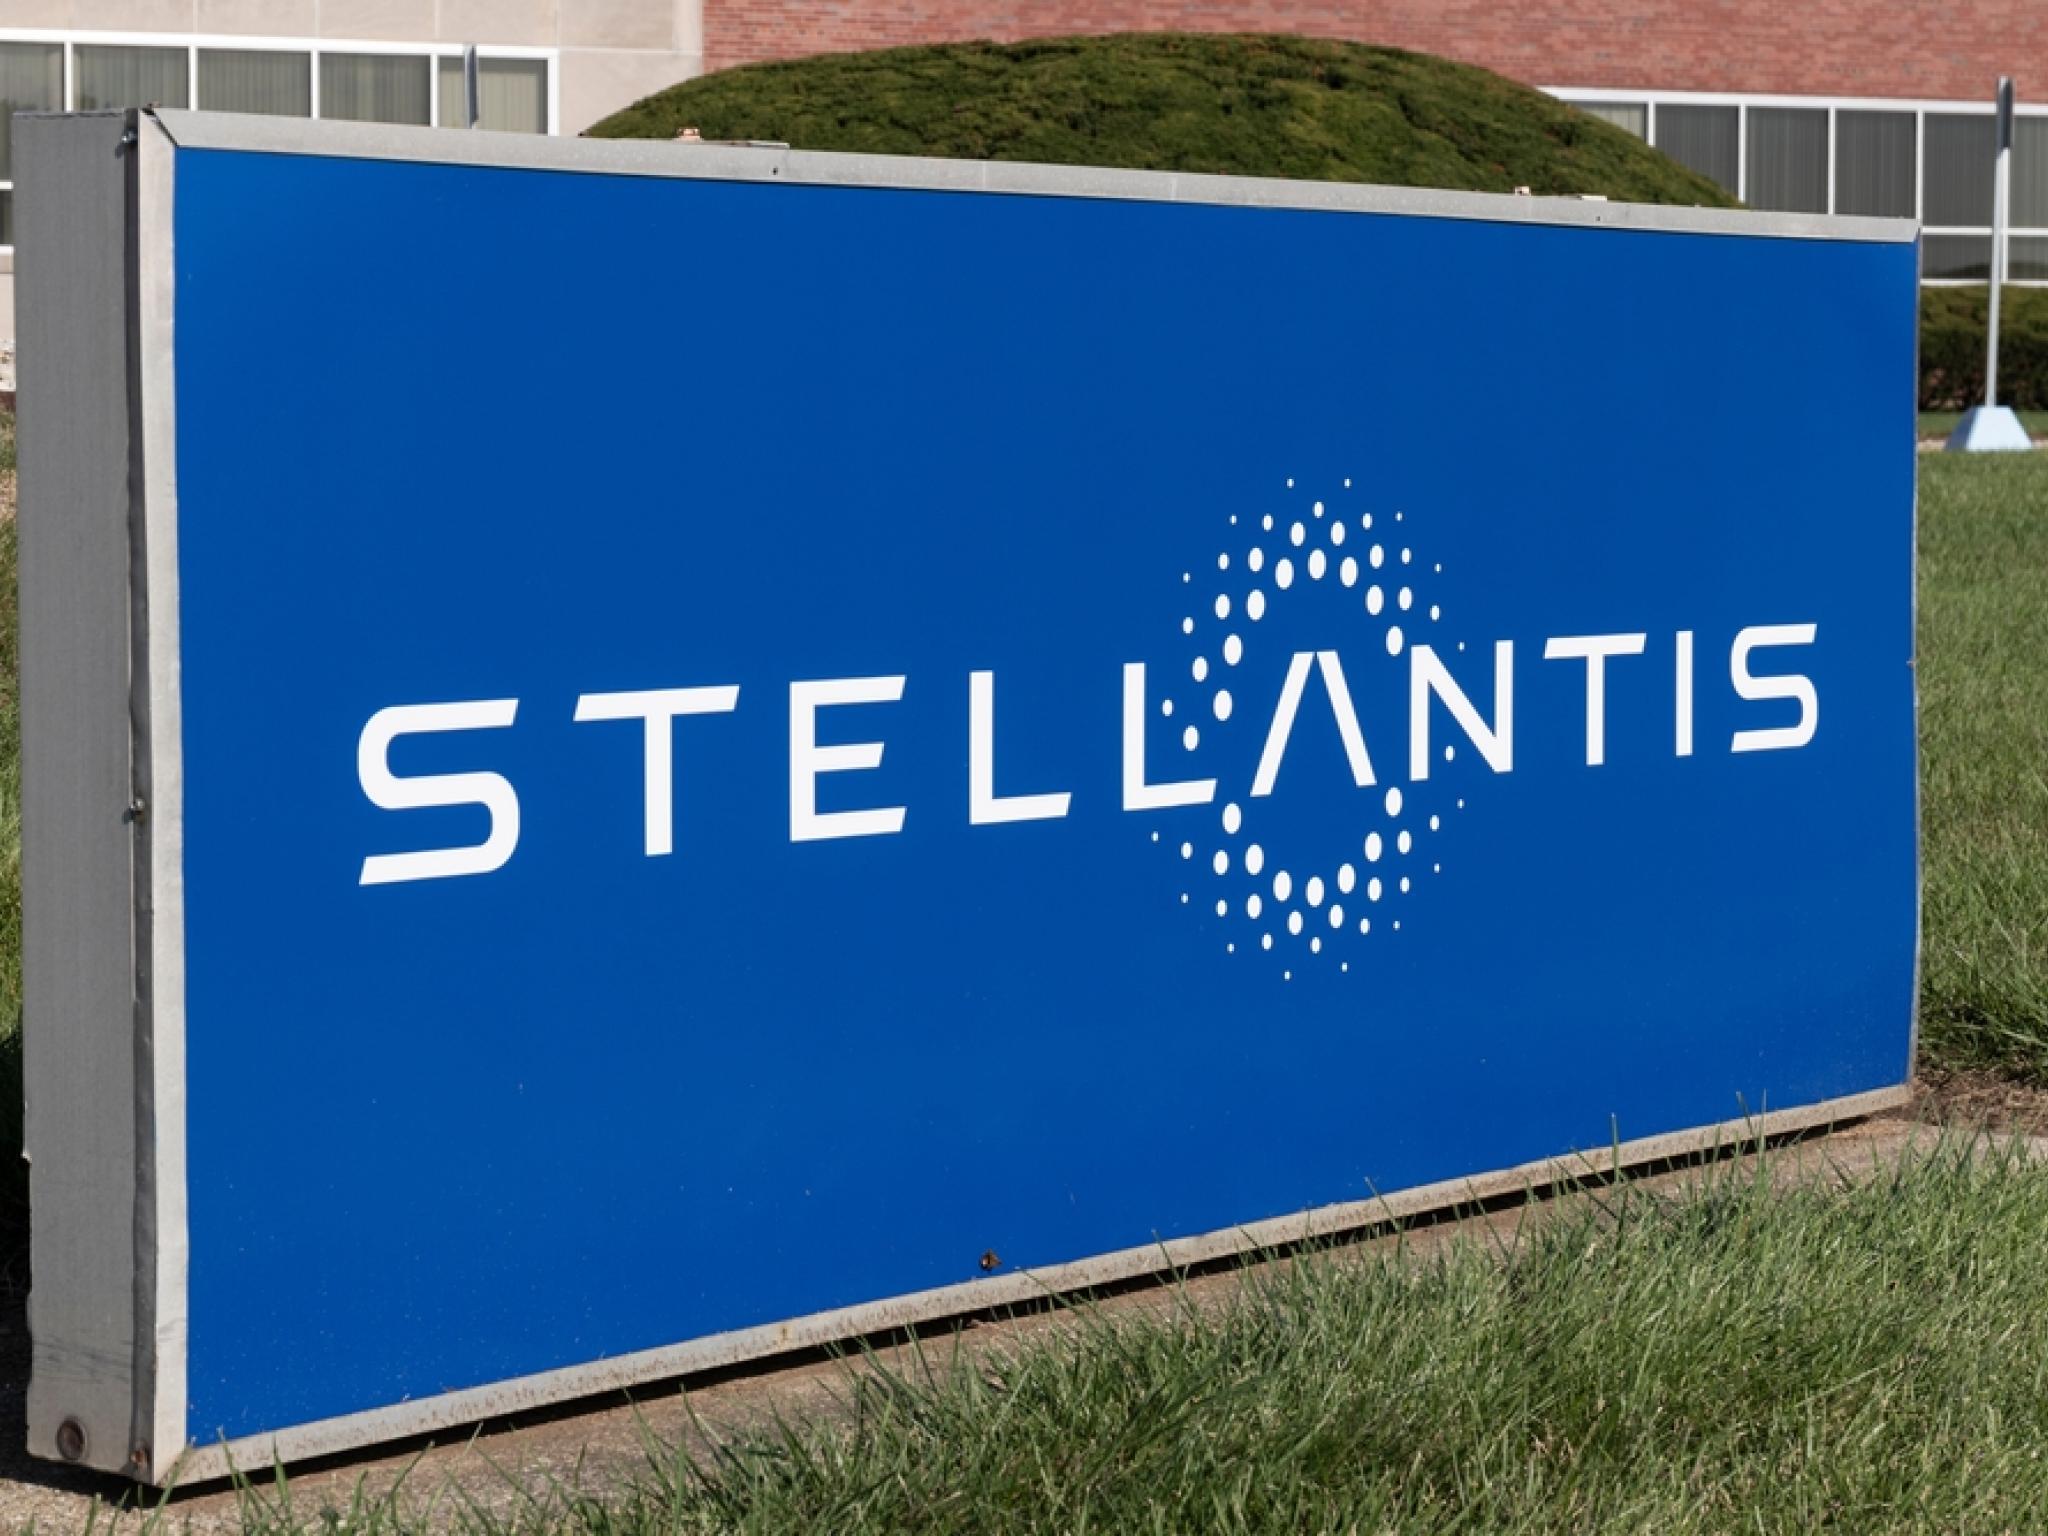  stellantis-rides-the-hybrid-wave-30-models-to-electrify-europe-by-year-end 